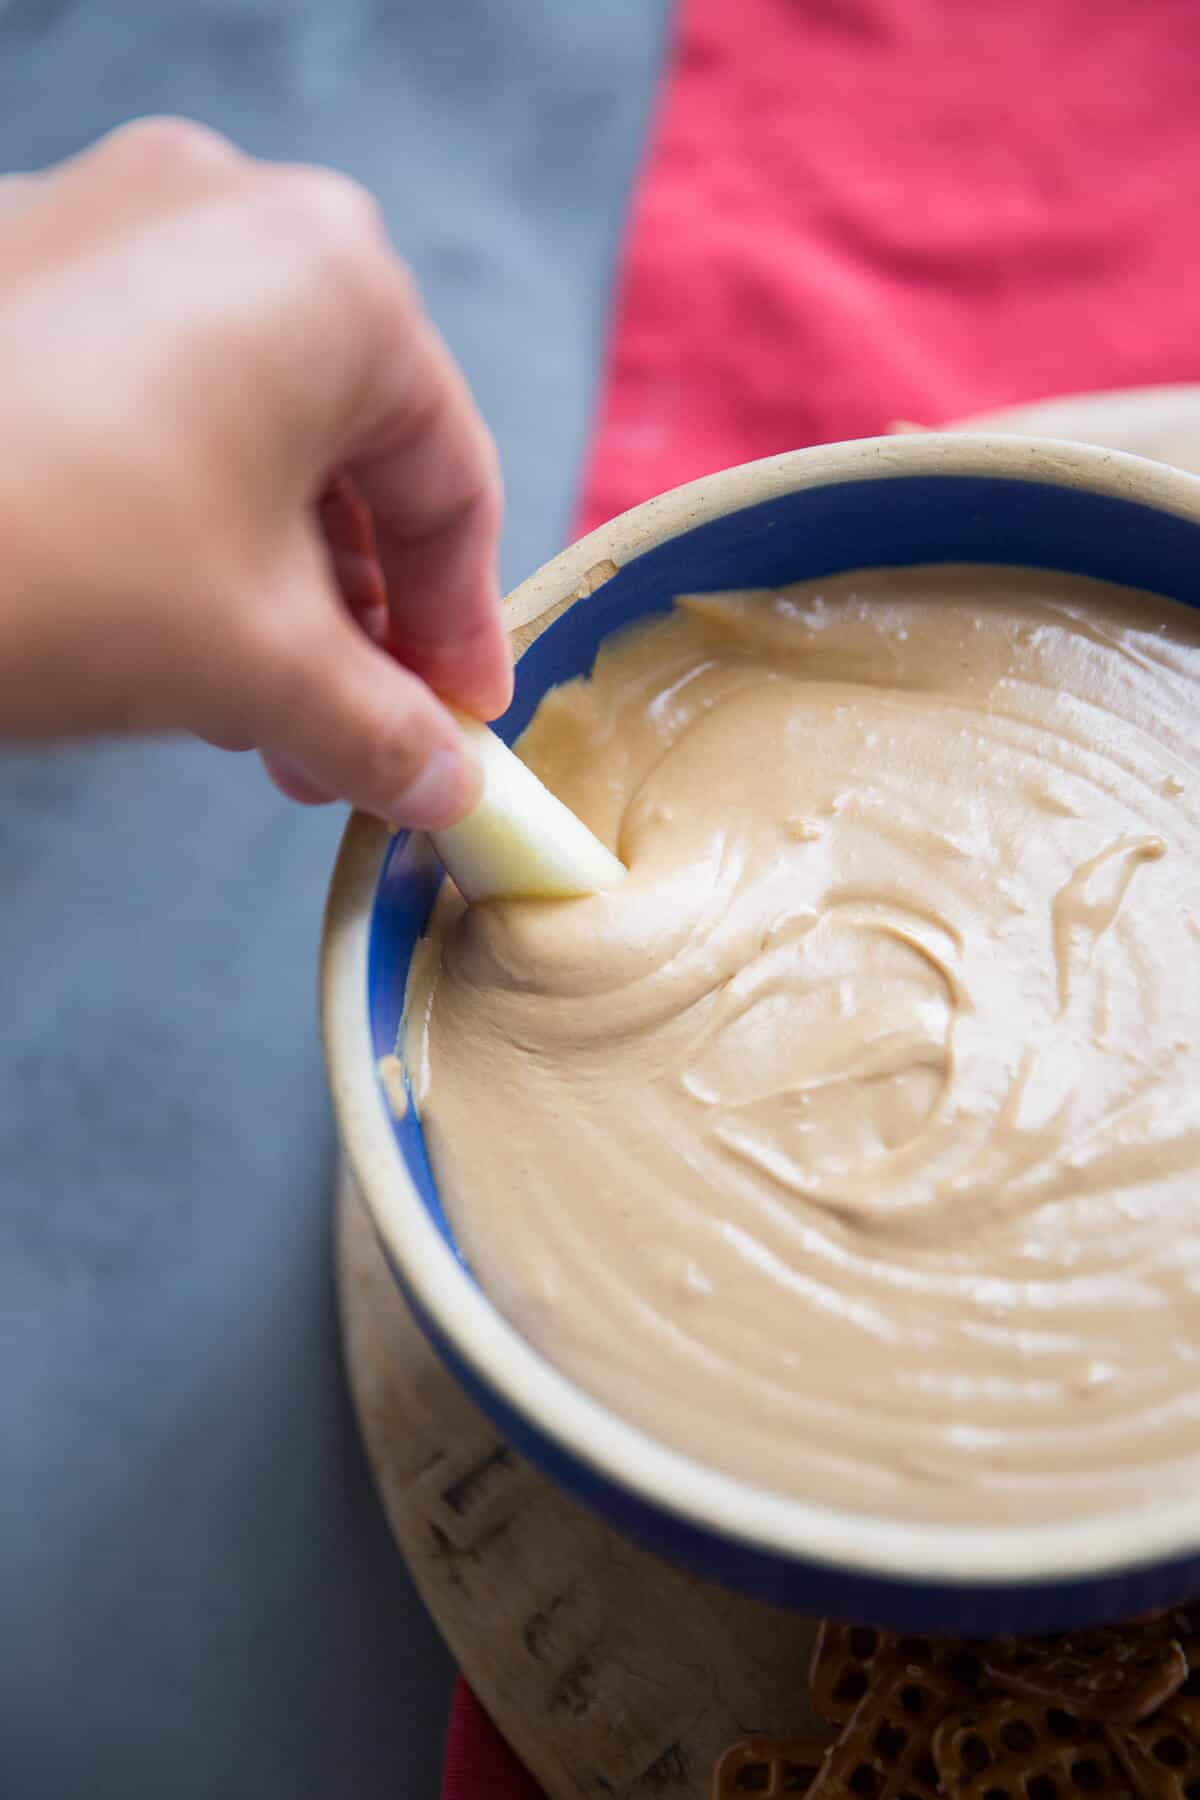 Amish Peanut Butter is a whole new way to enjoy peanut butter! This recipe is sweet, fluffy and so creamy.